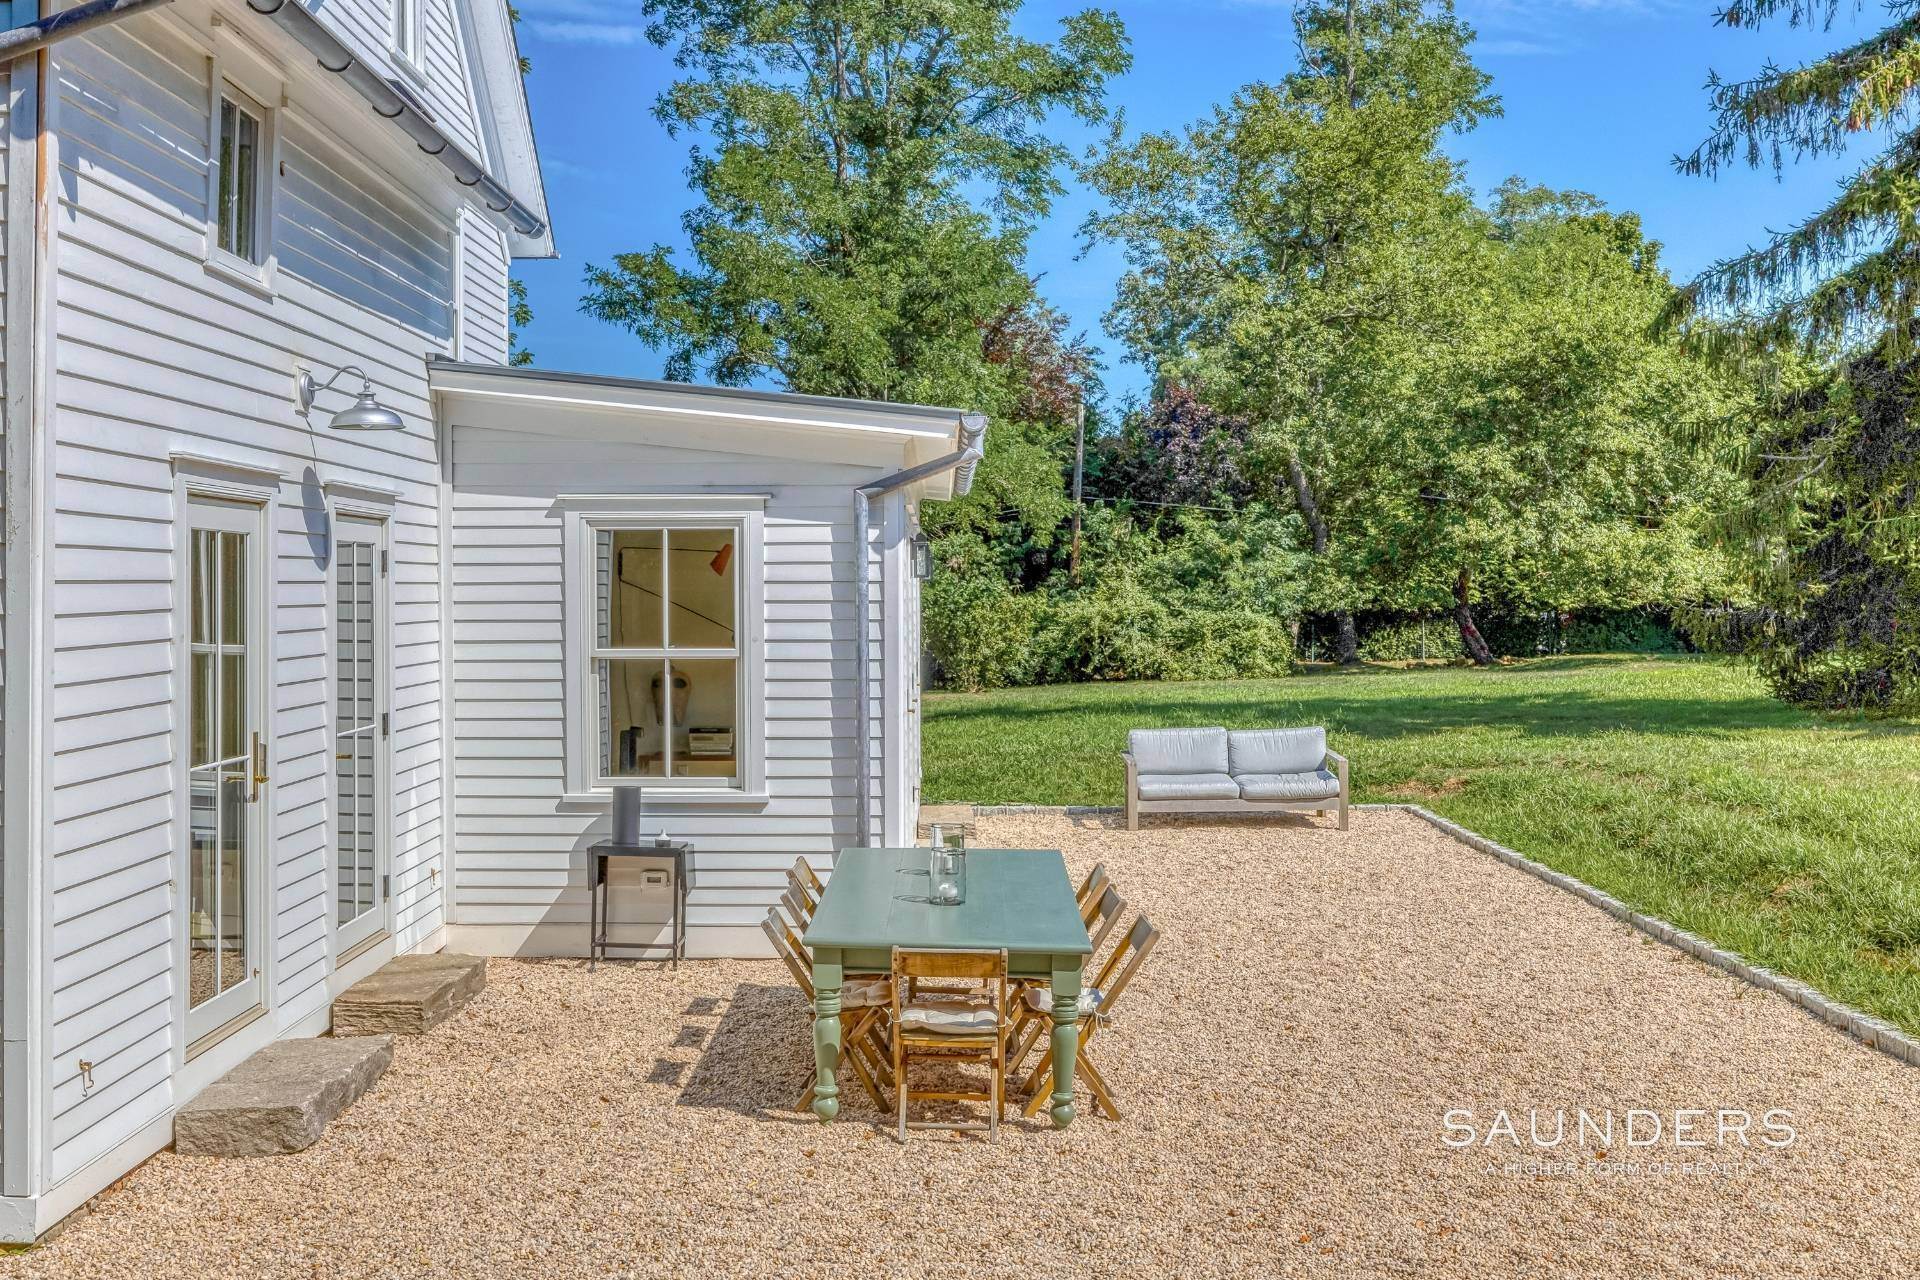 4. Single Family Homes for Sale at Shelter Island Restored 1900 Farmhouse With Barn 9 Sunshine Road, Shelter Island, NY 11964